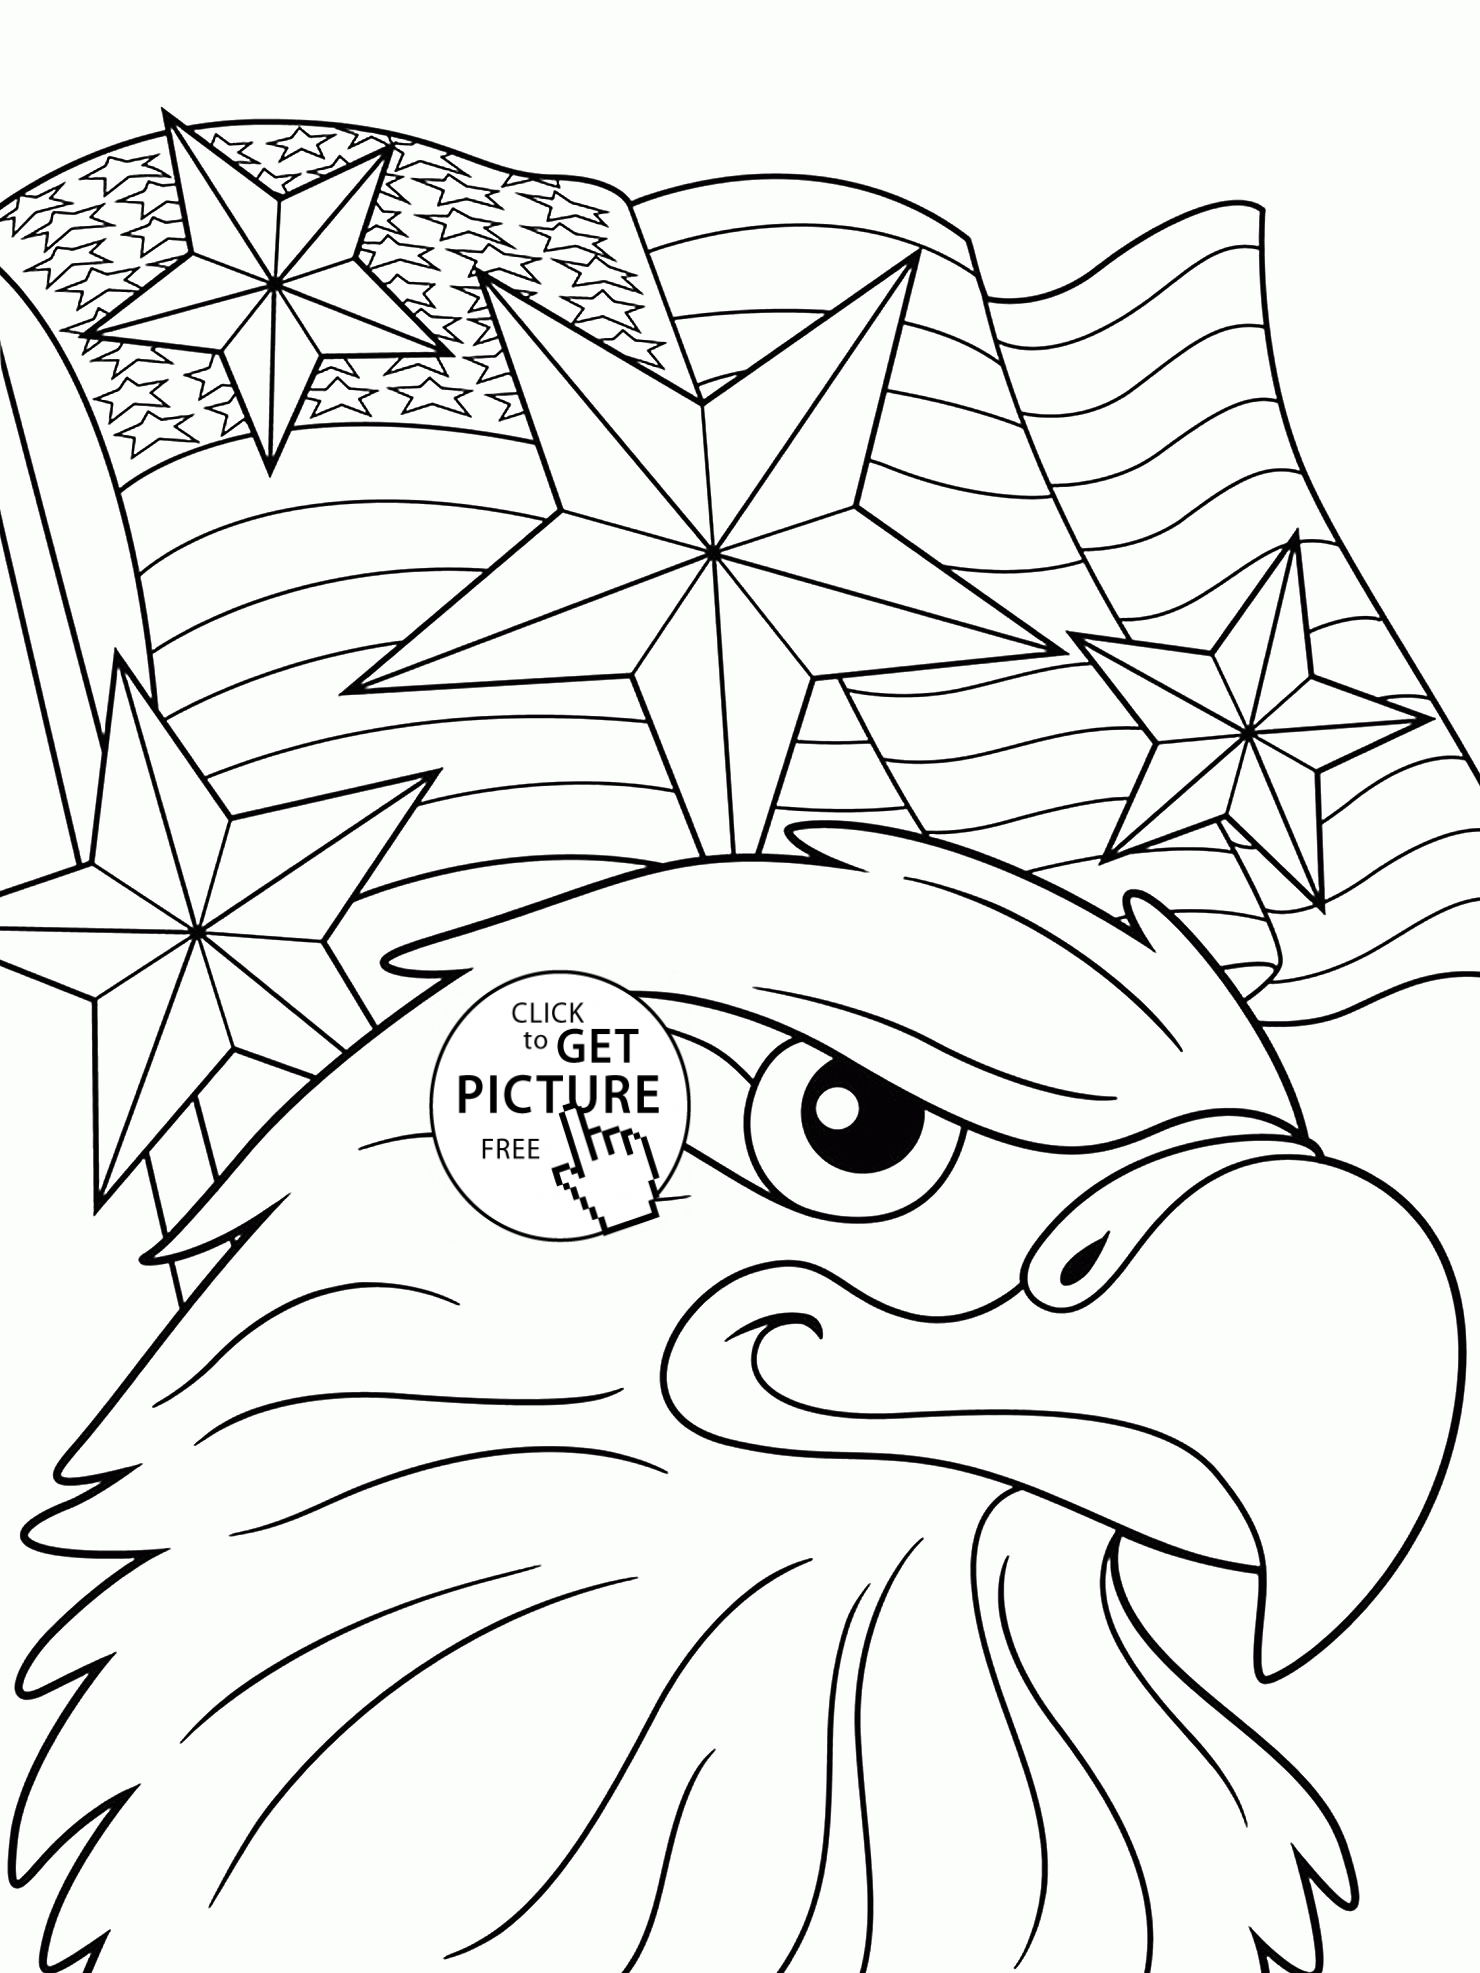 independence-day-america-coloring-page-clip-art-library